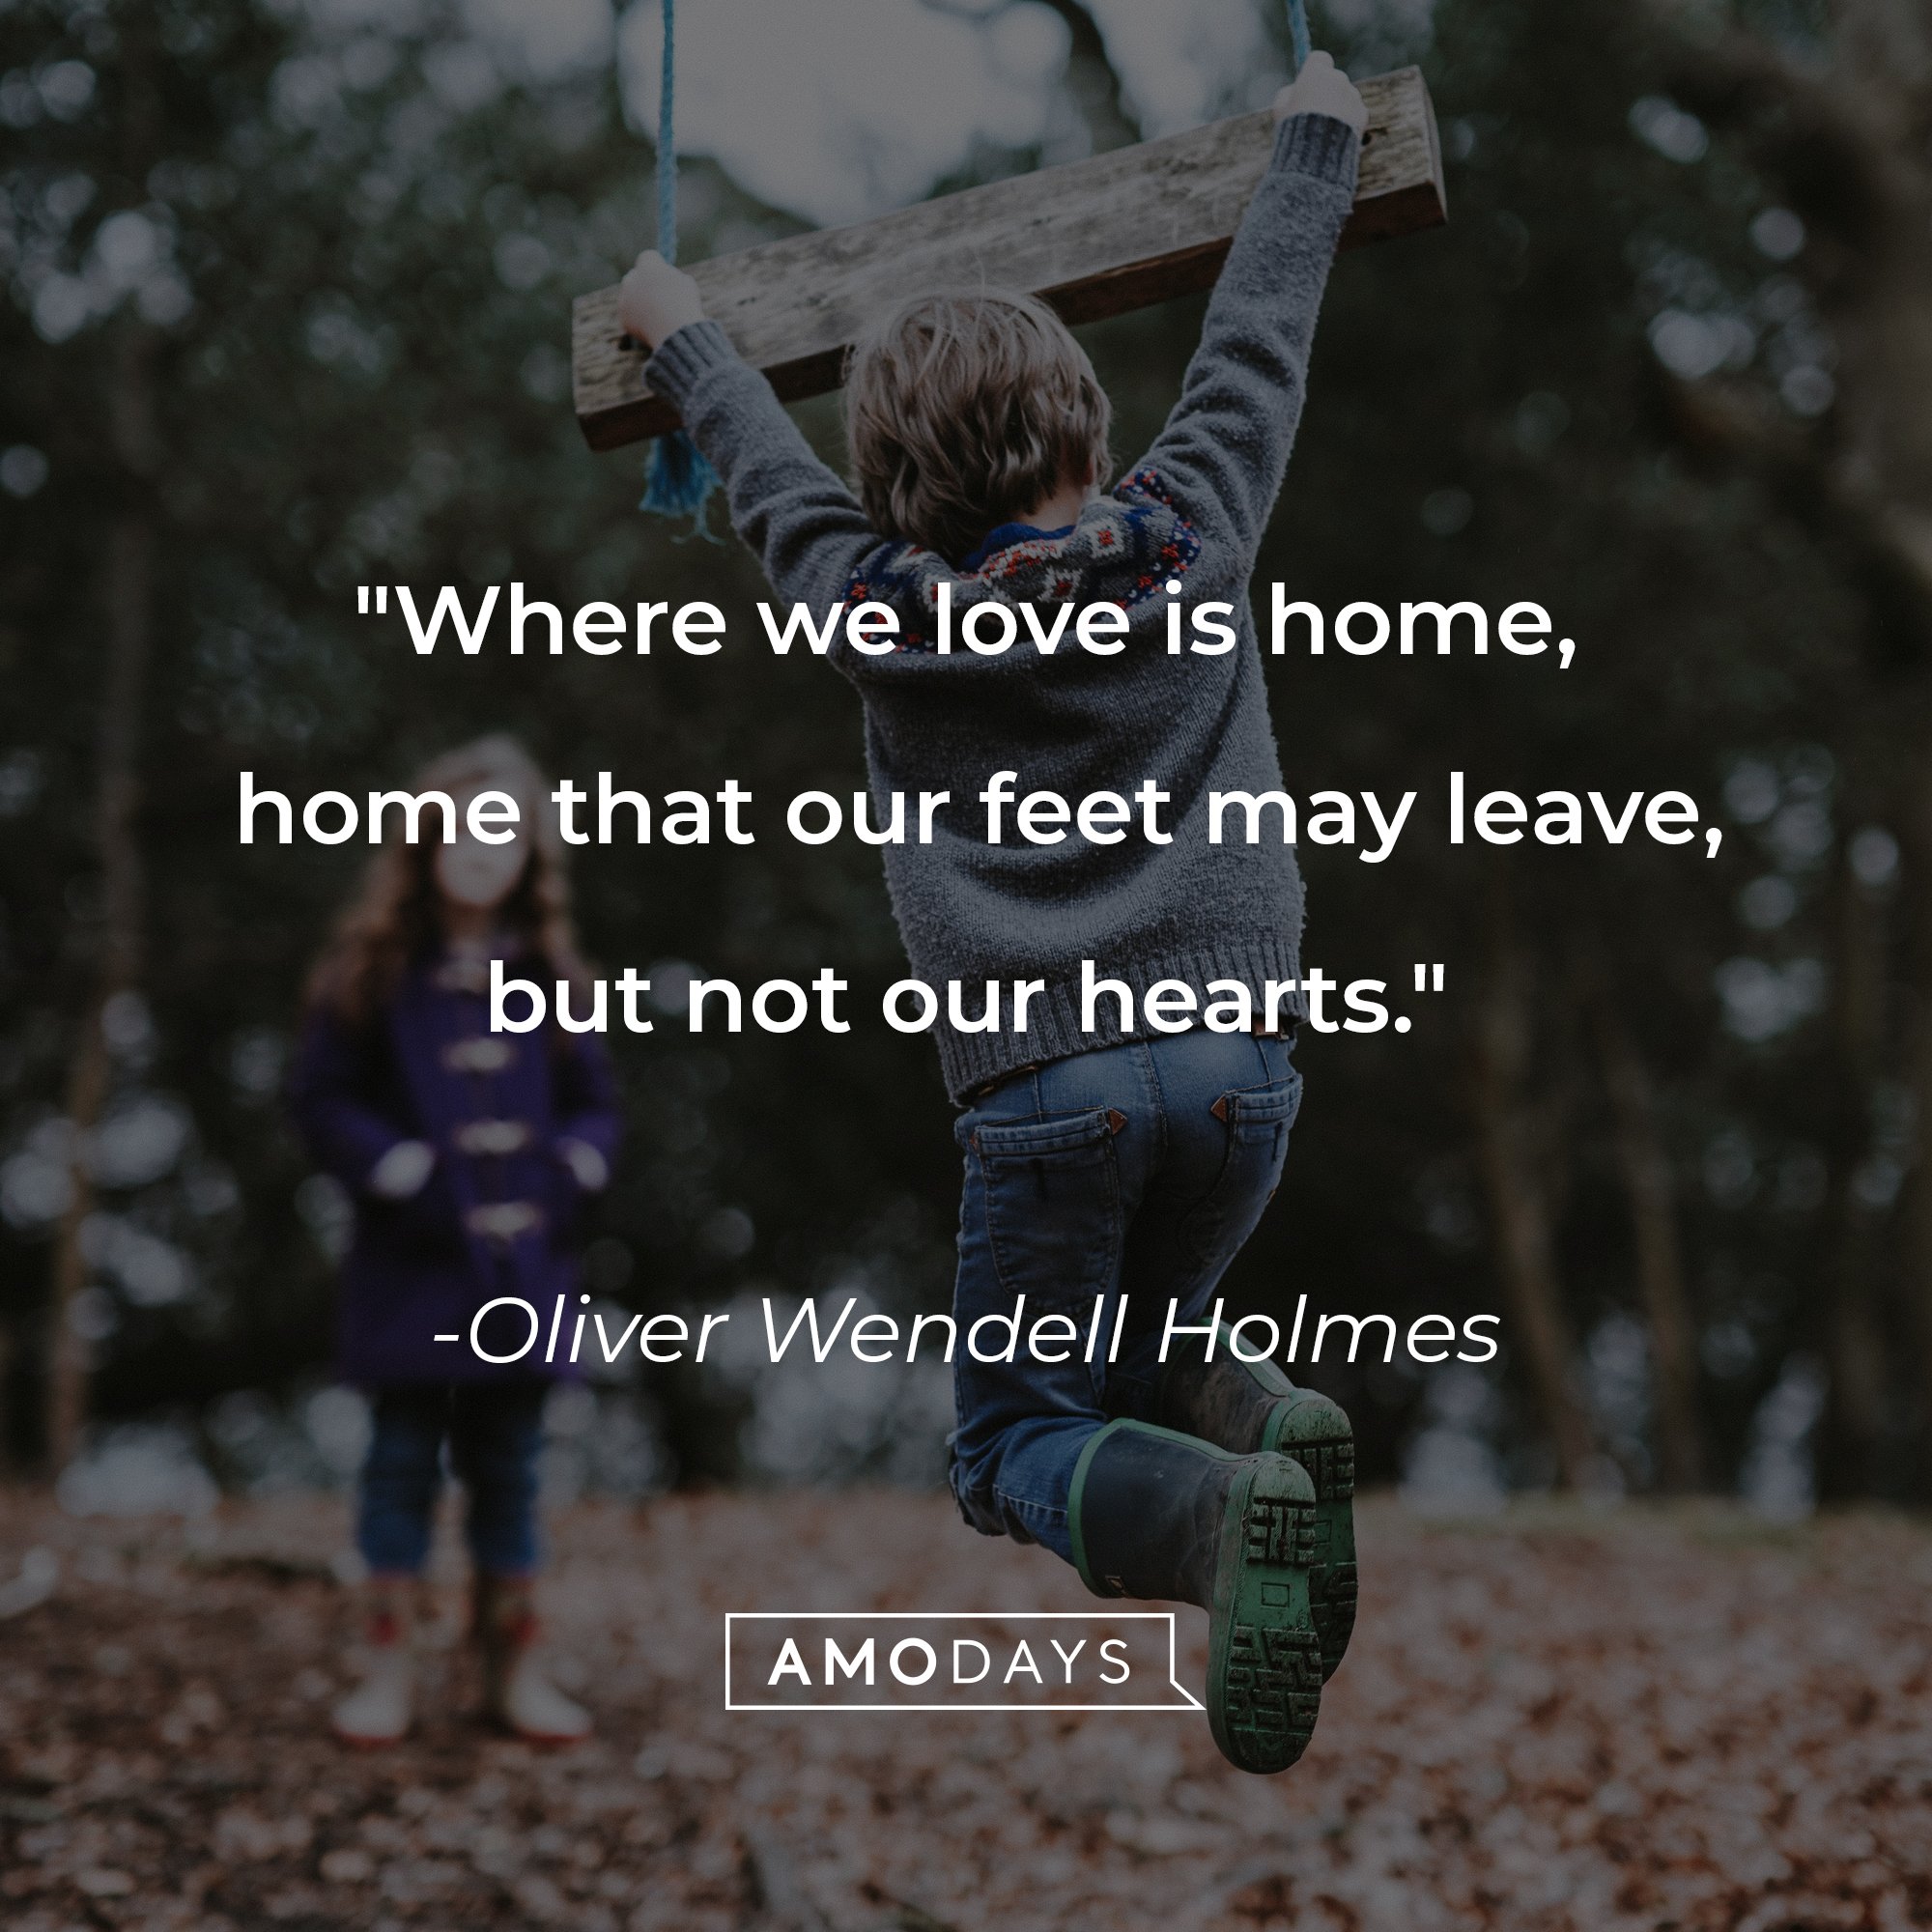 Oliver Wendell Holmes' quote: "Where we love is home, home that our feet may leave, but not our hearts." | Image: AmoDays